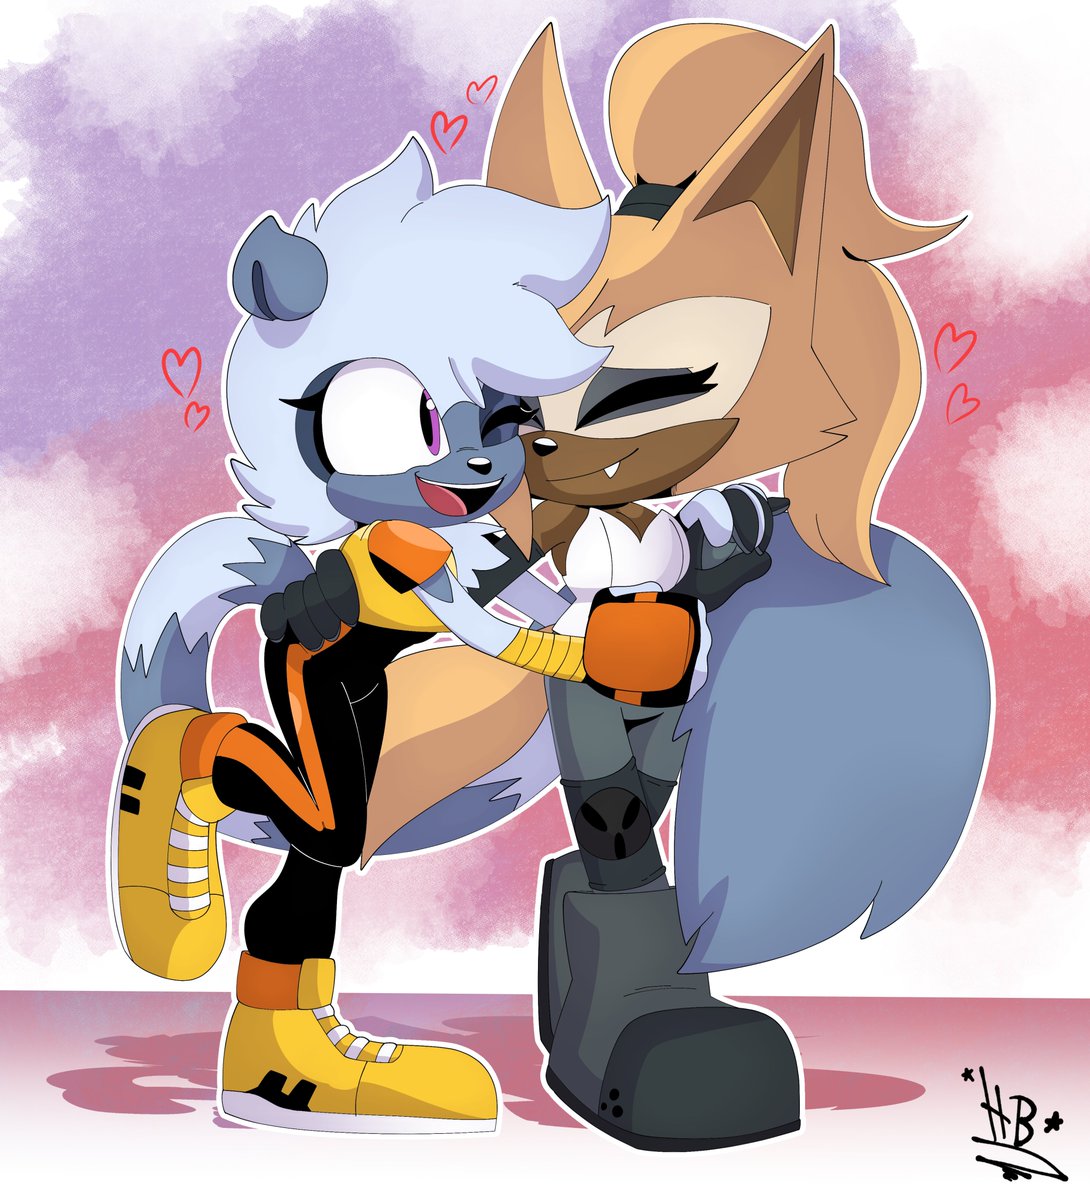 Canon as canon can be
Thanks IDW
.
.
.
#sonicfanart #SonicTheHedeghog #IDWsonic #WhisperTheWolf #tanglethelemur #whispangle